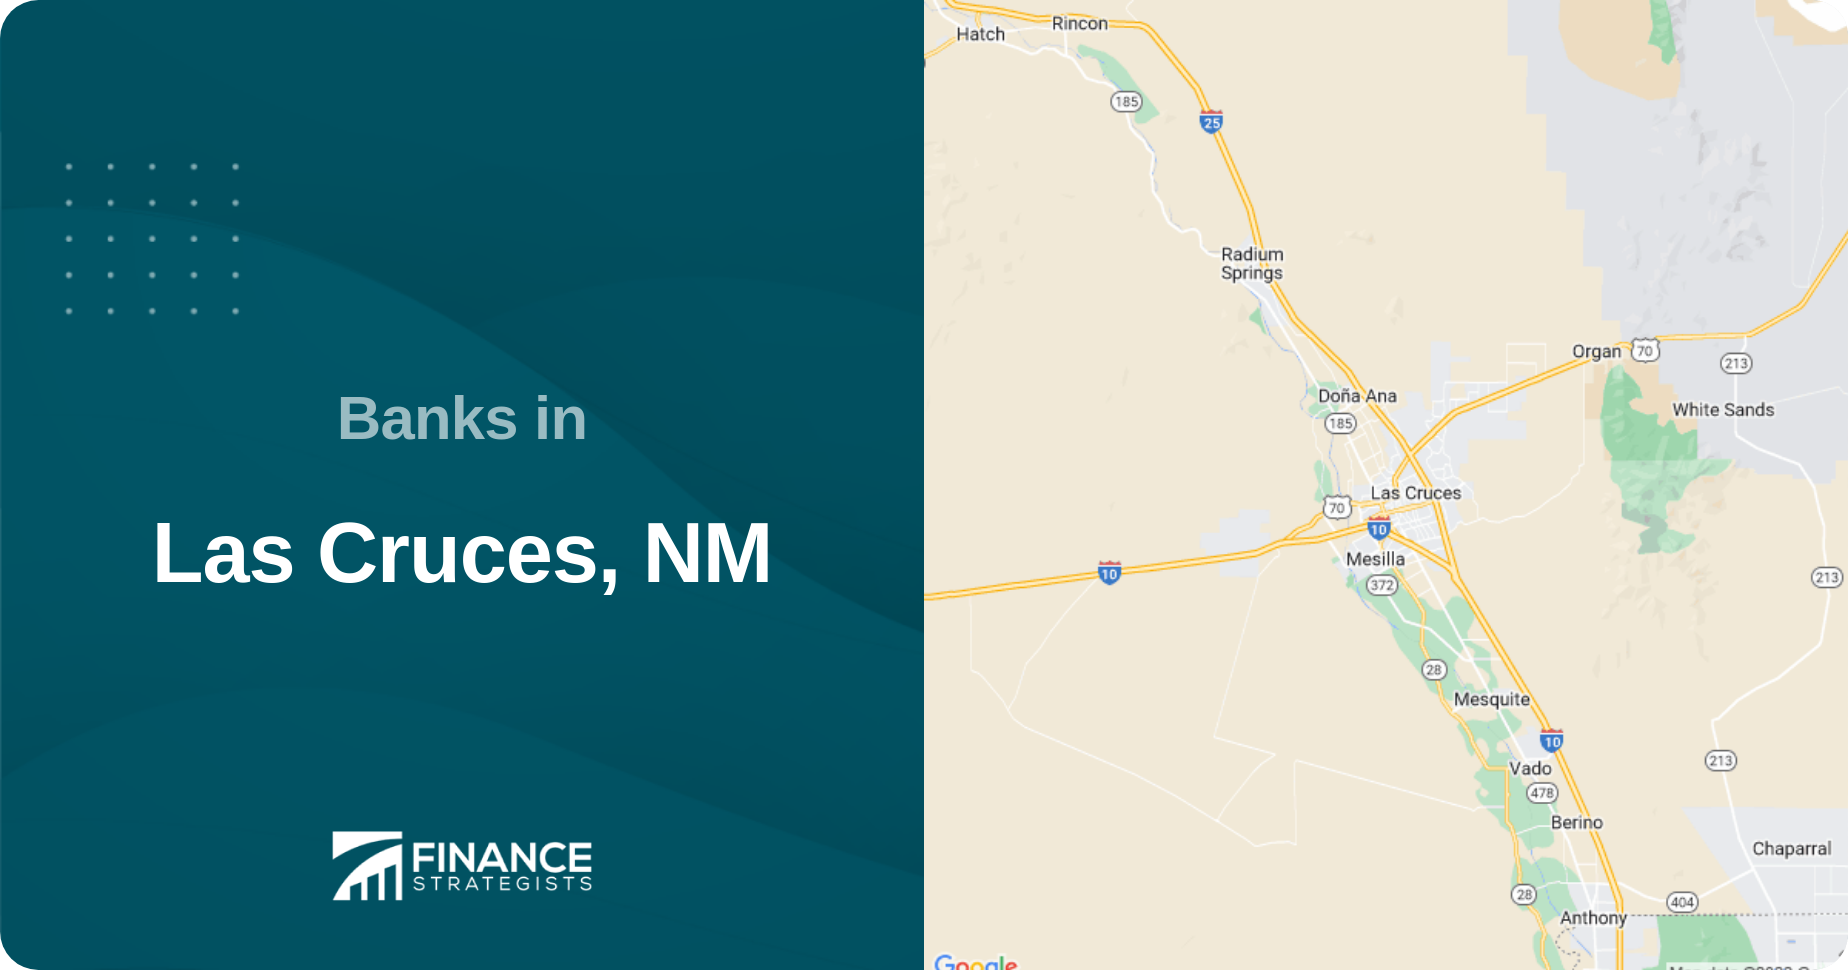 Banks in Las Cruces, NM